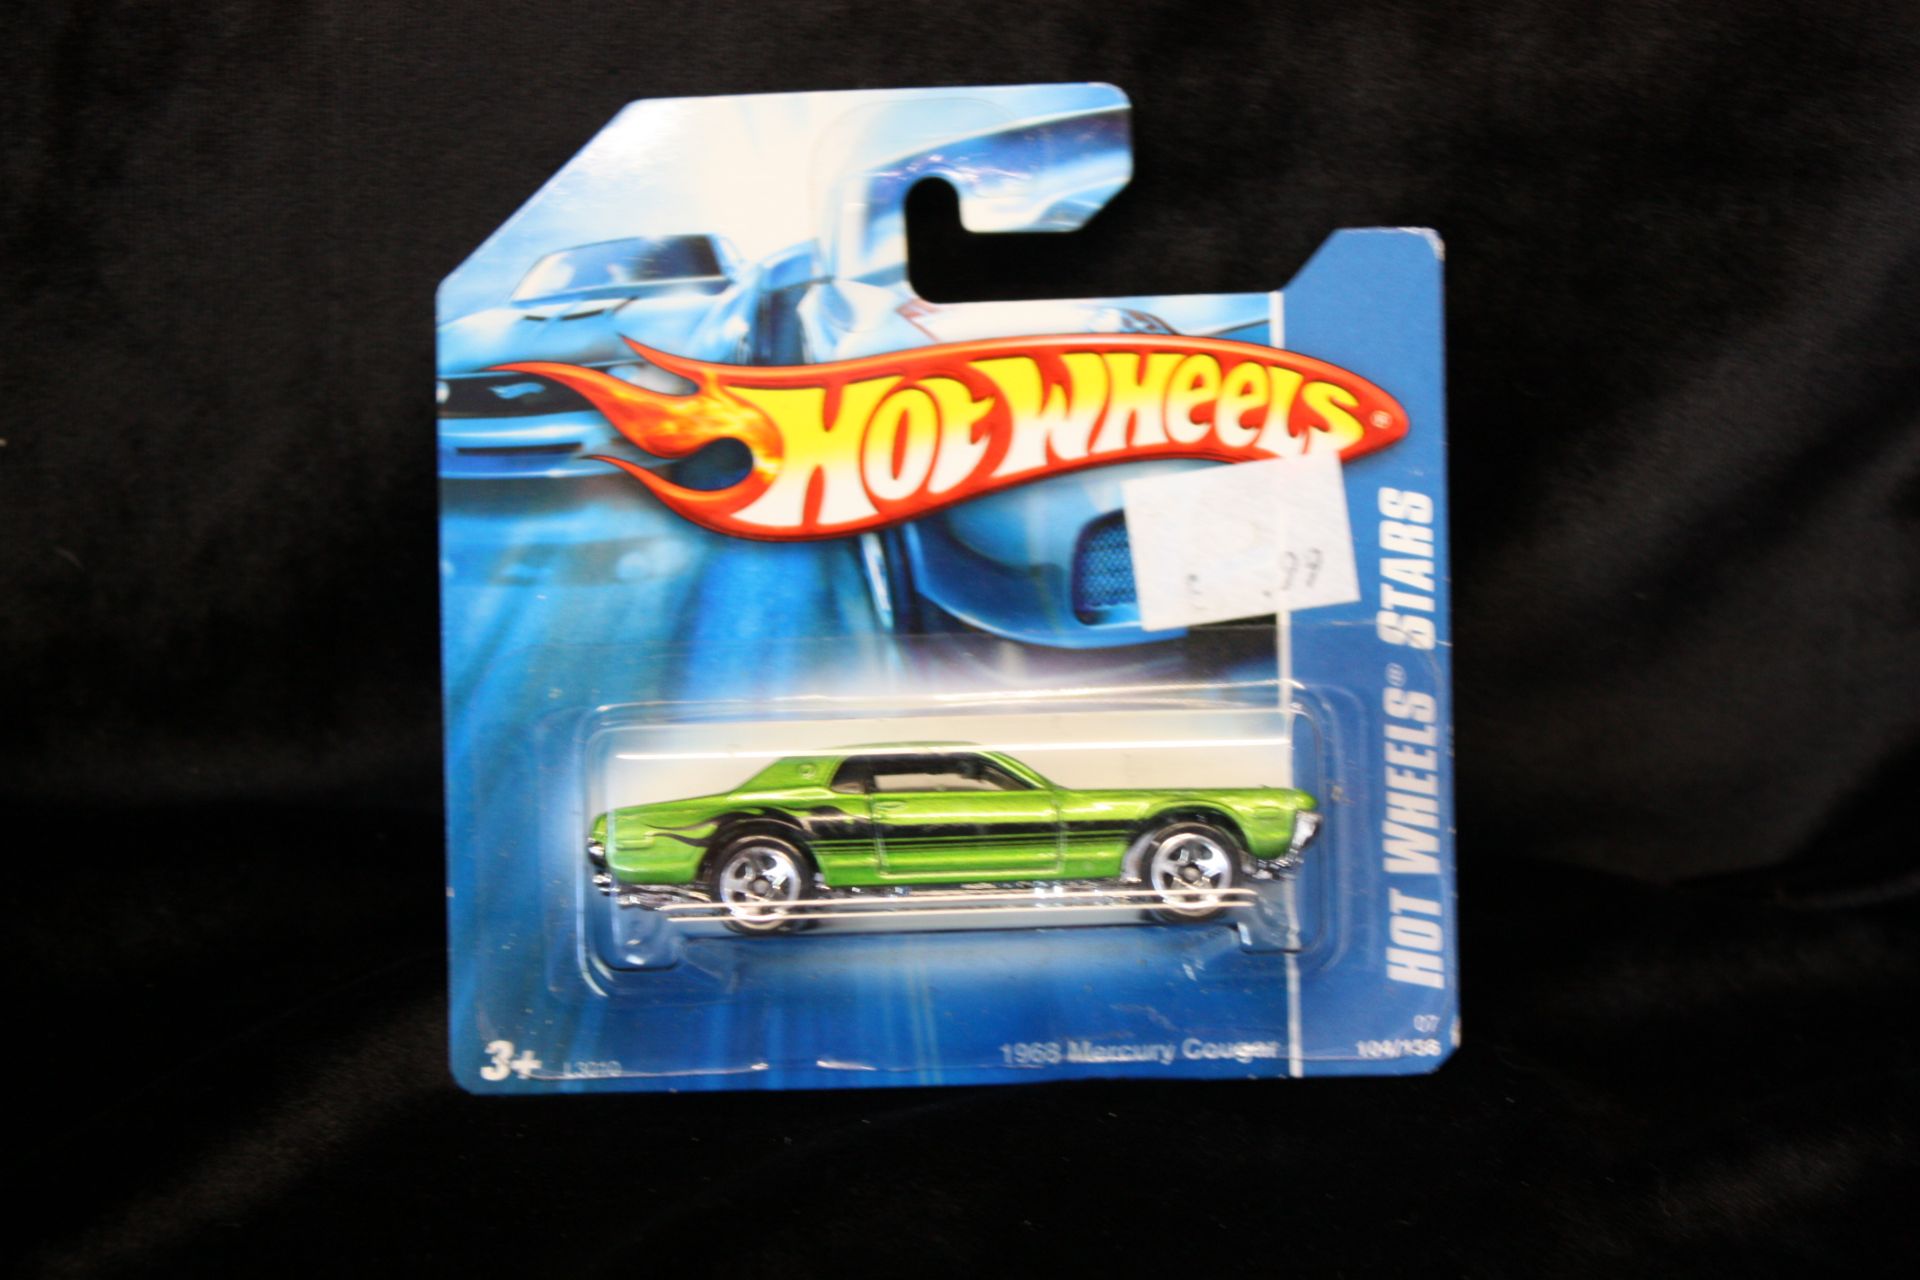 Hot Wheels Stars 1968 Mercury Cougar. Model is part of an old private collection - All items are